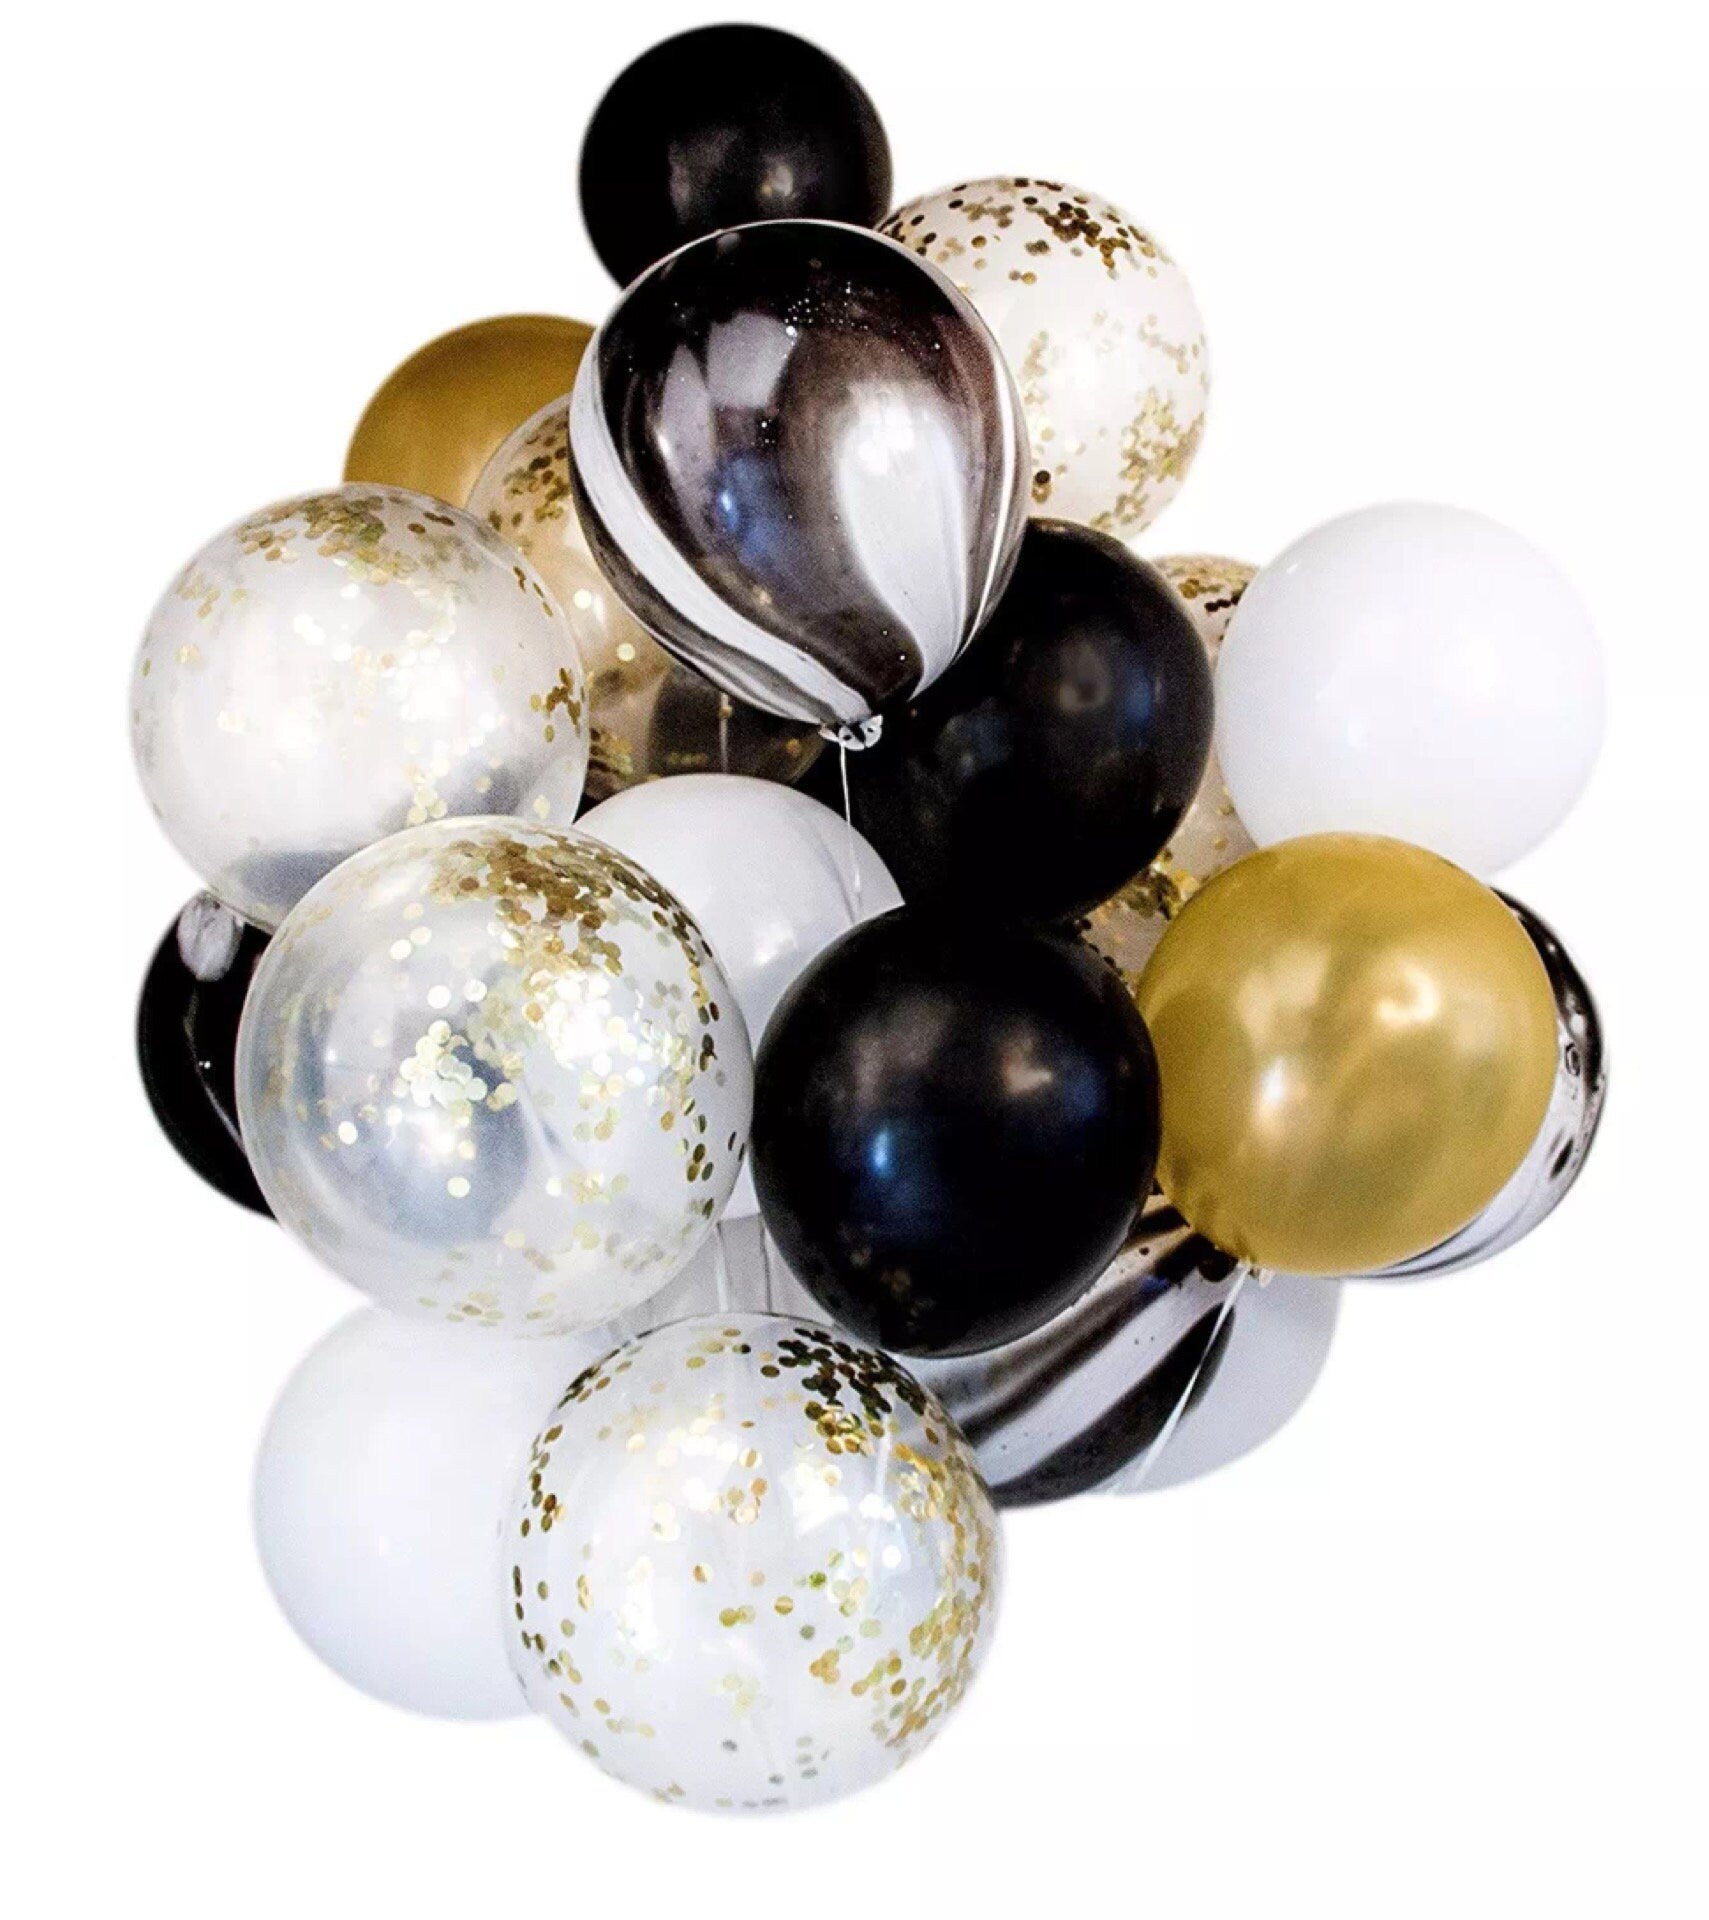 Black Gold Marble Balloons Set 20 Pack // Gold Confetti Balloon // Pear White Latex Balloons Thickened 12" 20pcs, Ready To Inflate